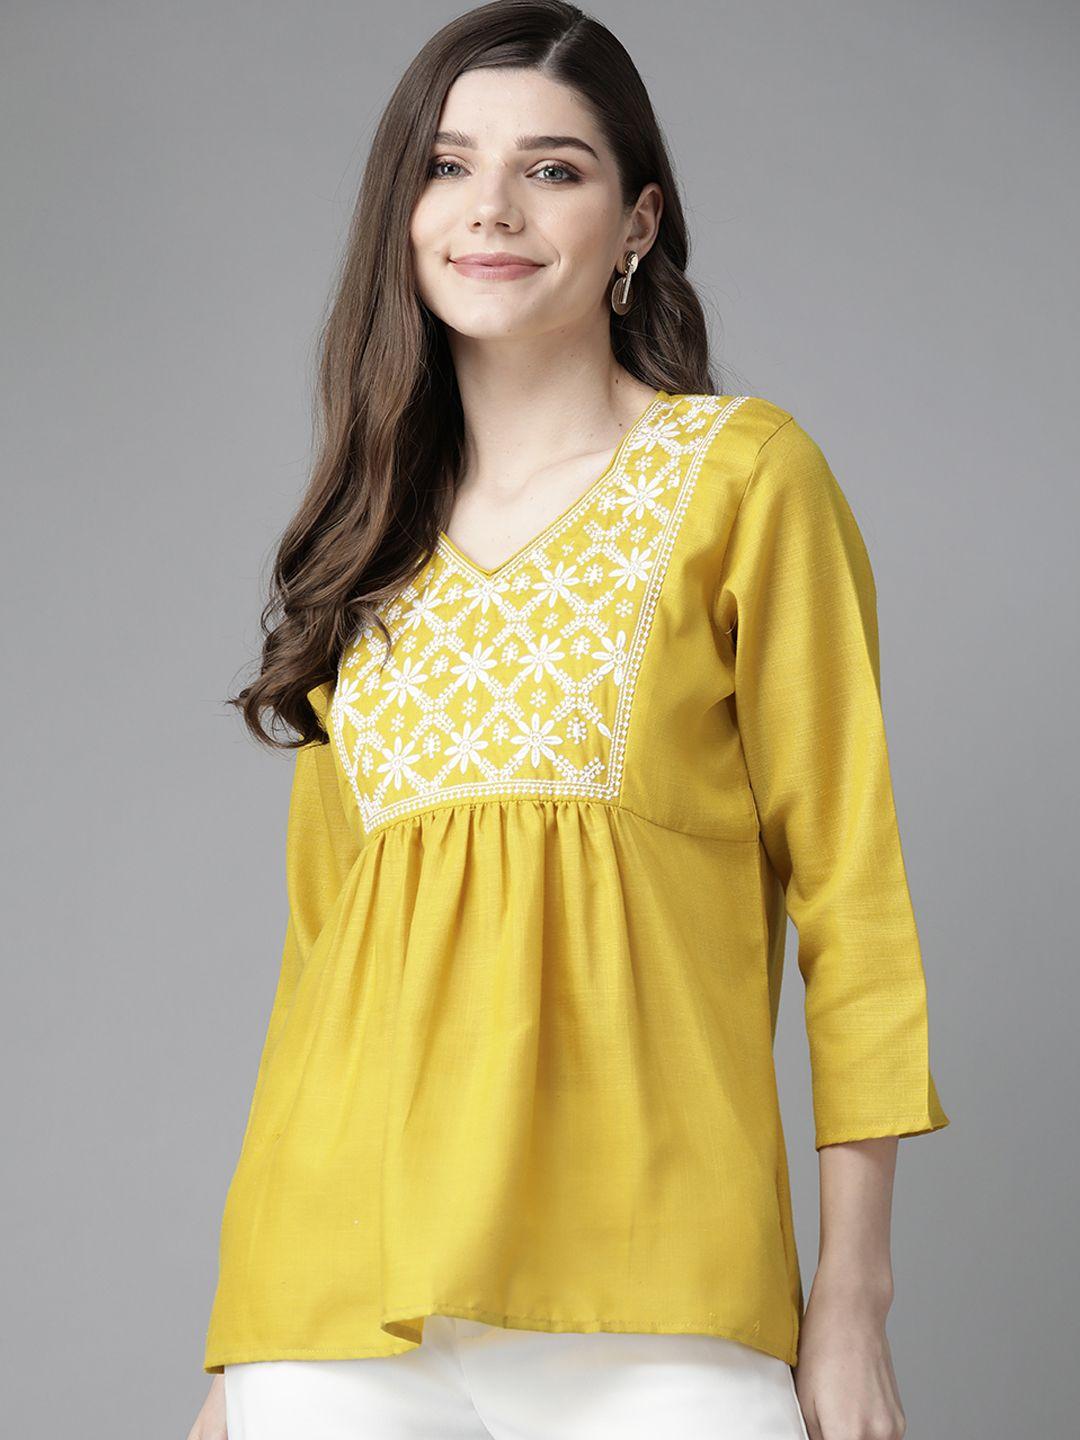 bhama couture mustard yellow & white floral embroidered regular top